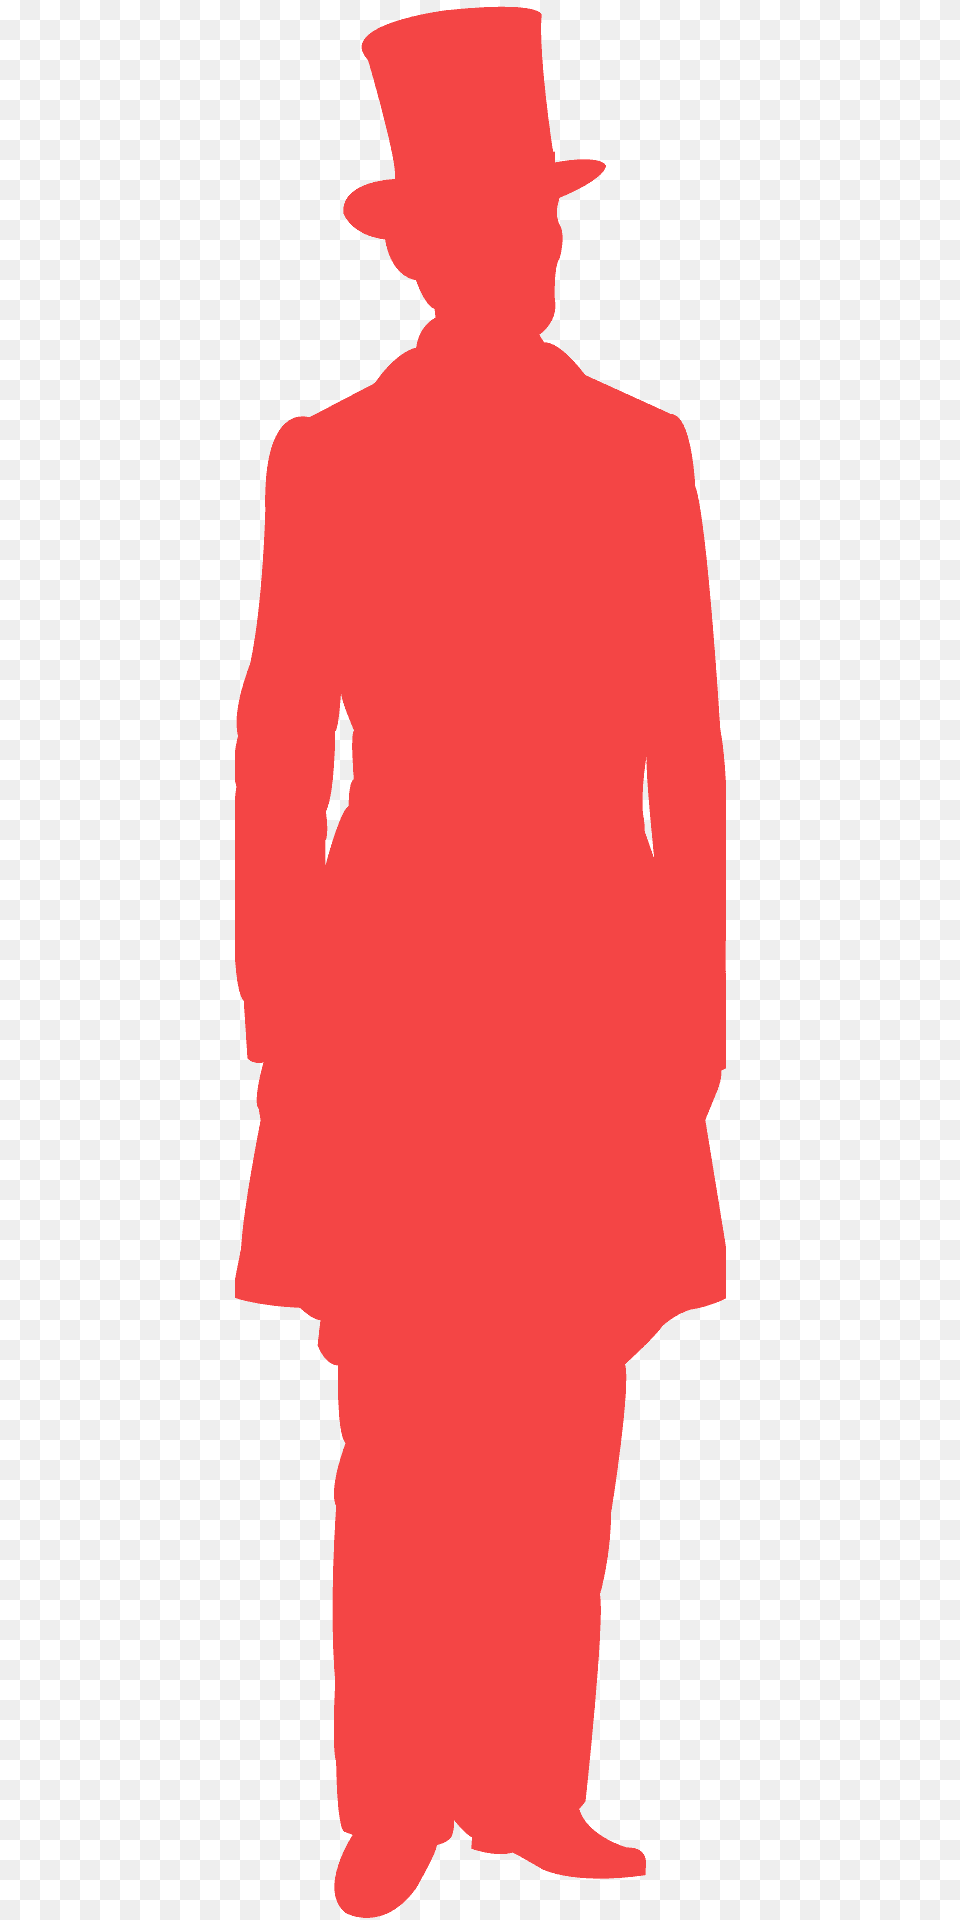 Man With Top Hat Silhouette, Adult, Clothing, Male, Person Png